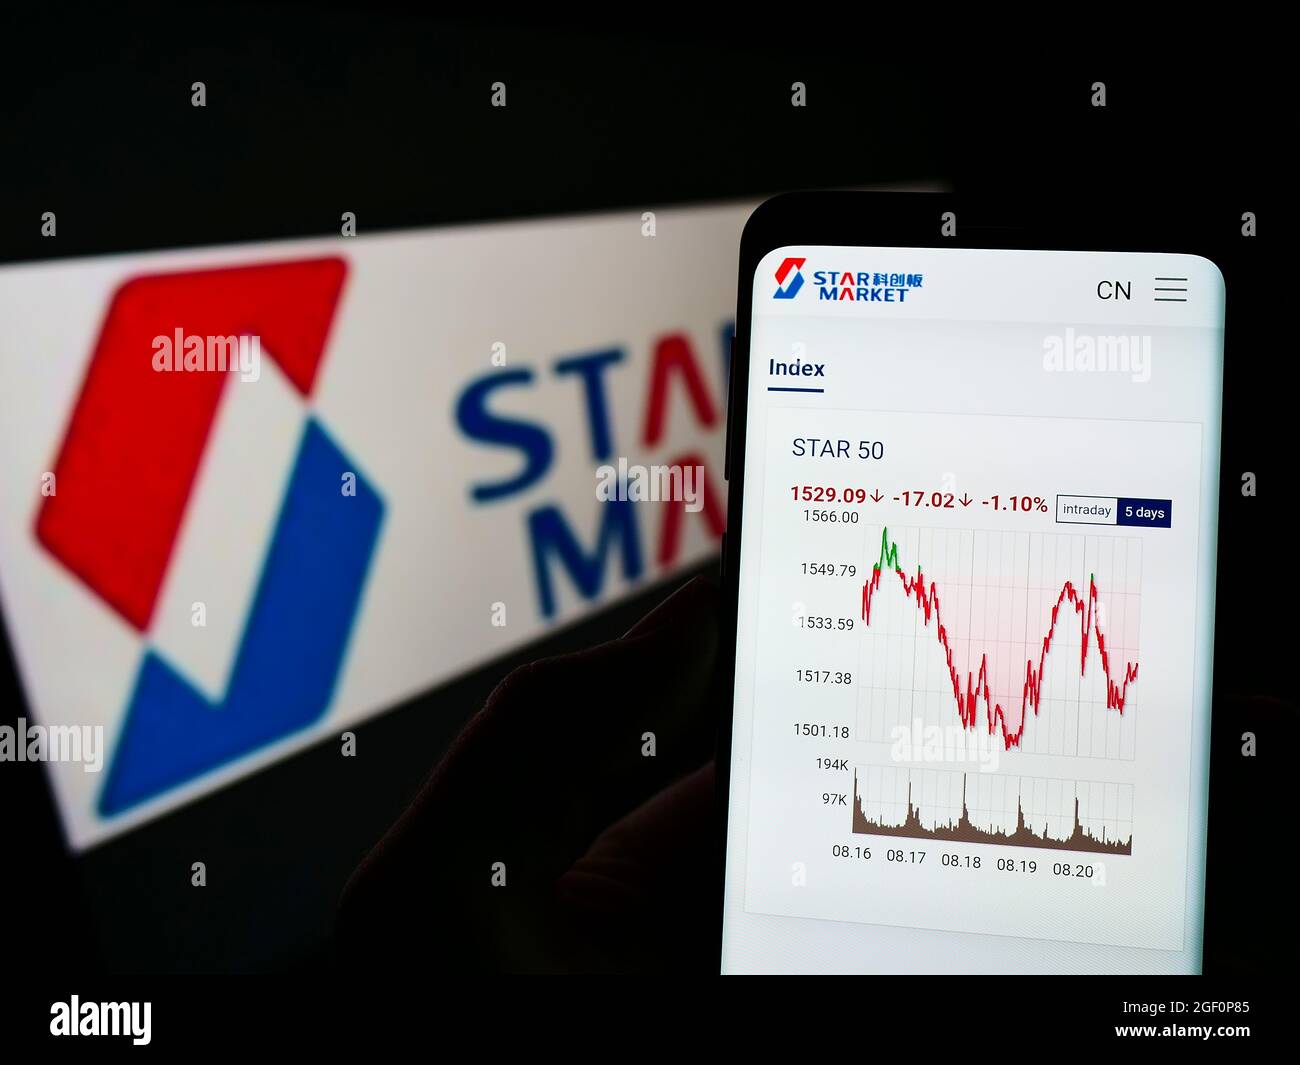 Person holding cellphone with webpage of Shanghai Stock Exchange STAR Market on screen in front of business logo. Focus on center of phone display. Stock Photo